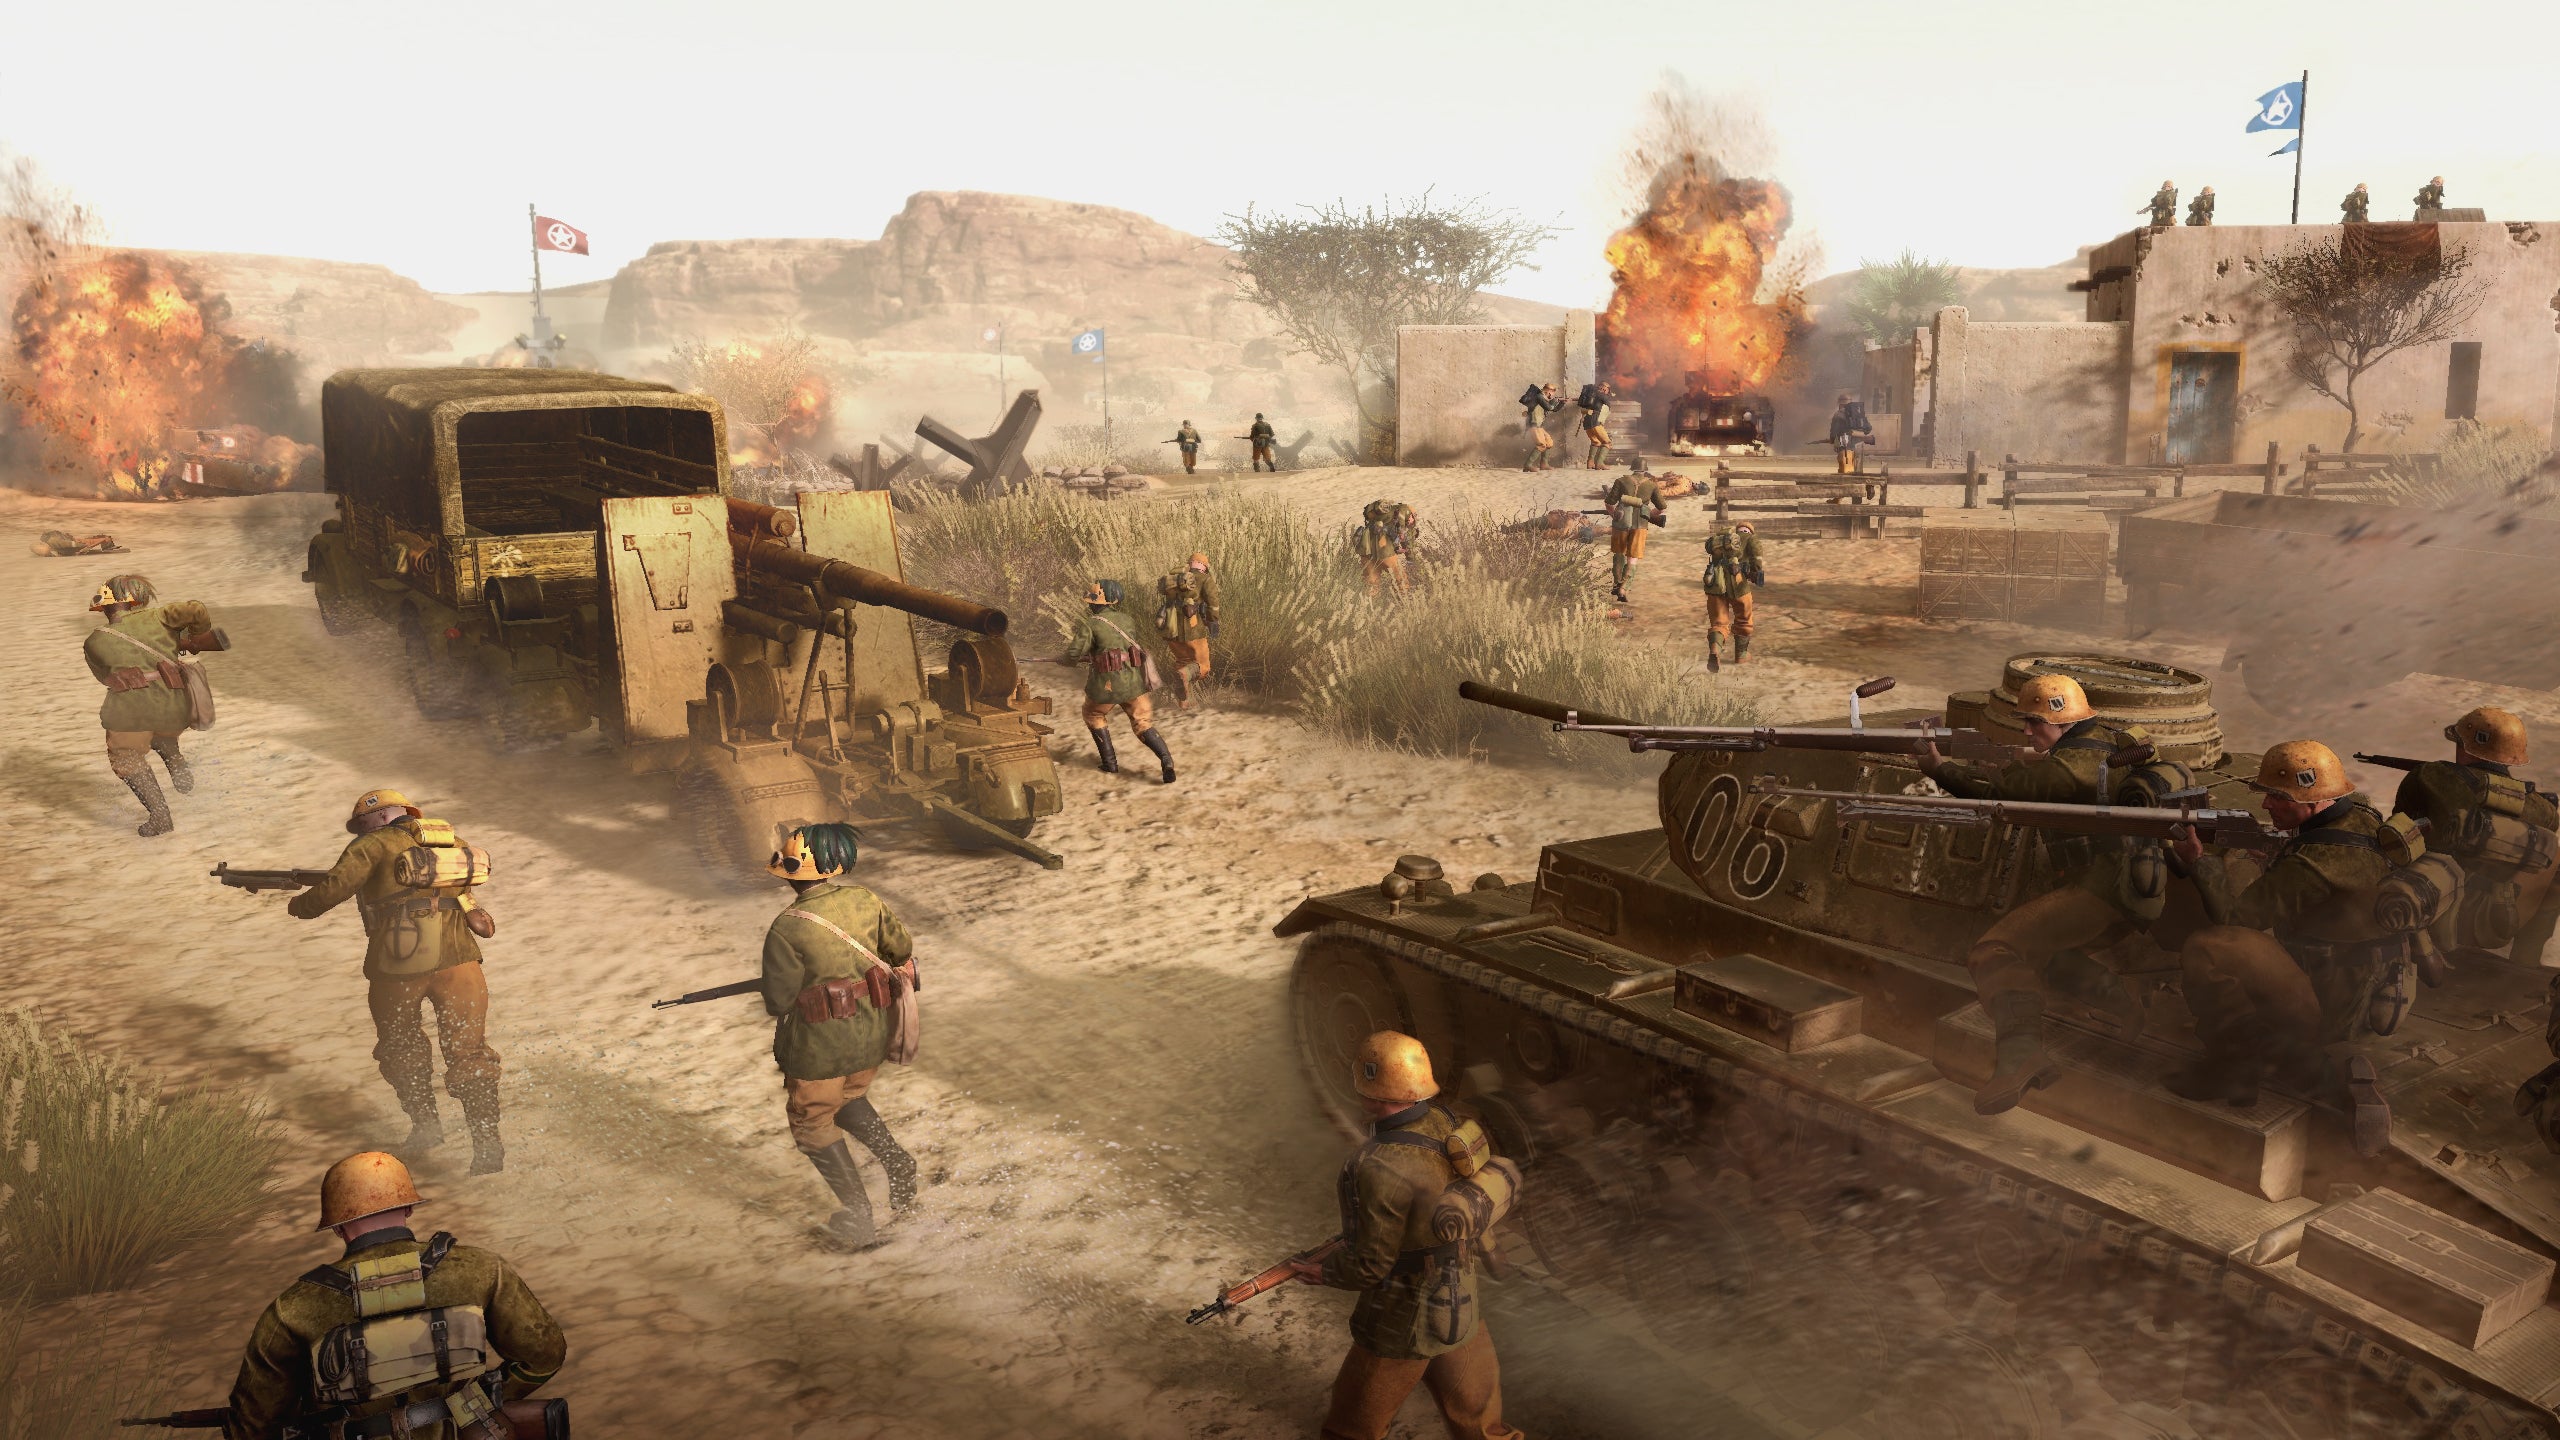 Company of Heroes 3 preview - an edited action shot of infantry riding a tank in Tunis